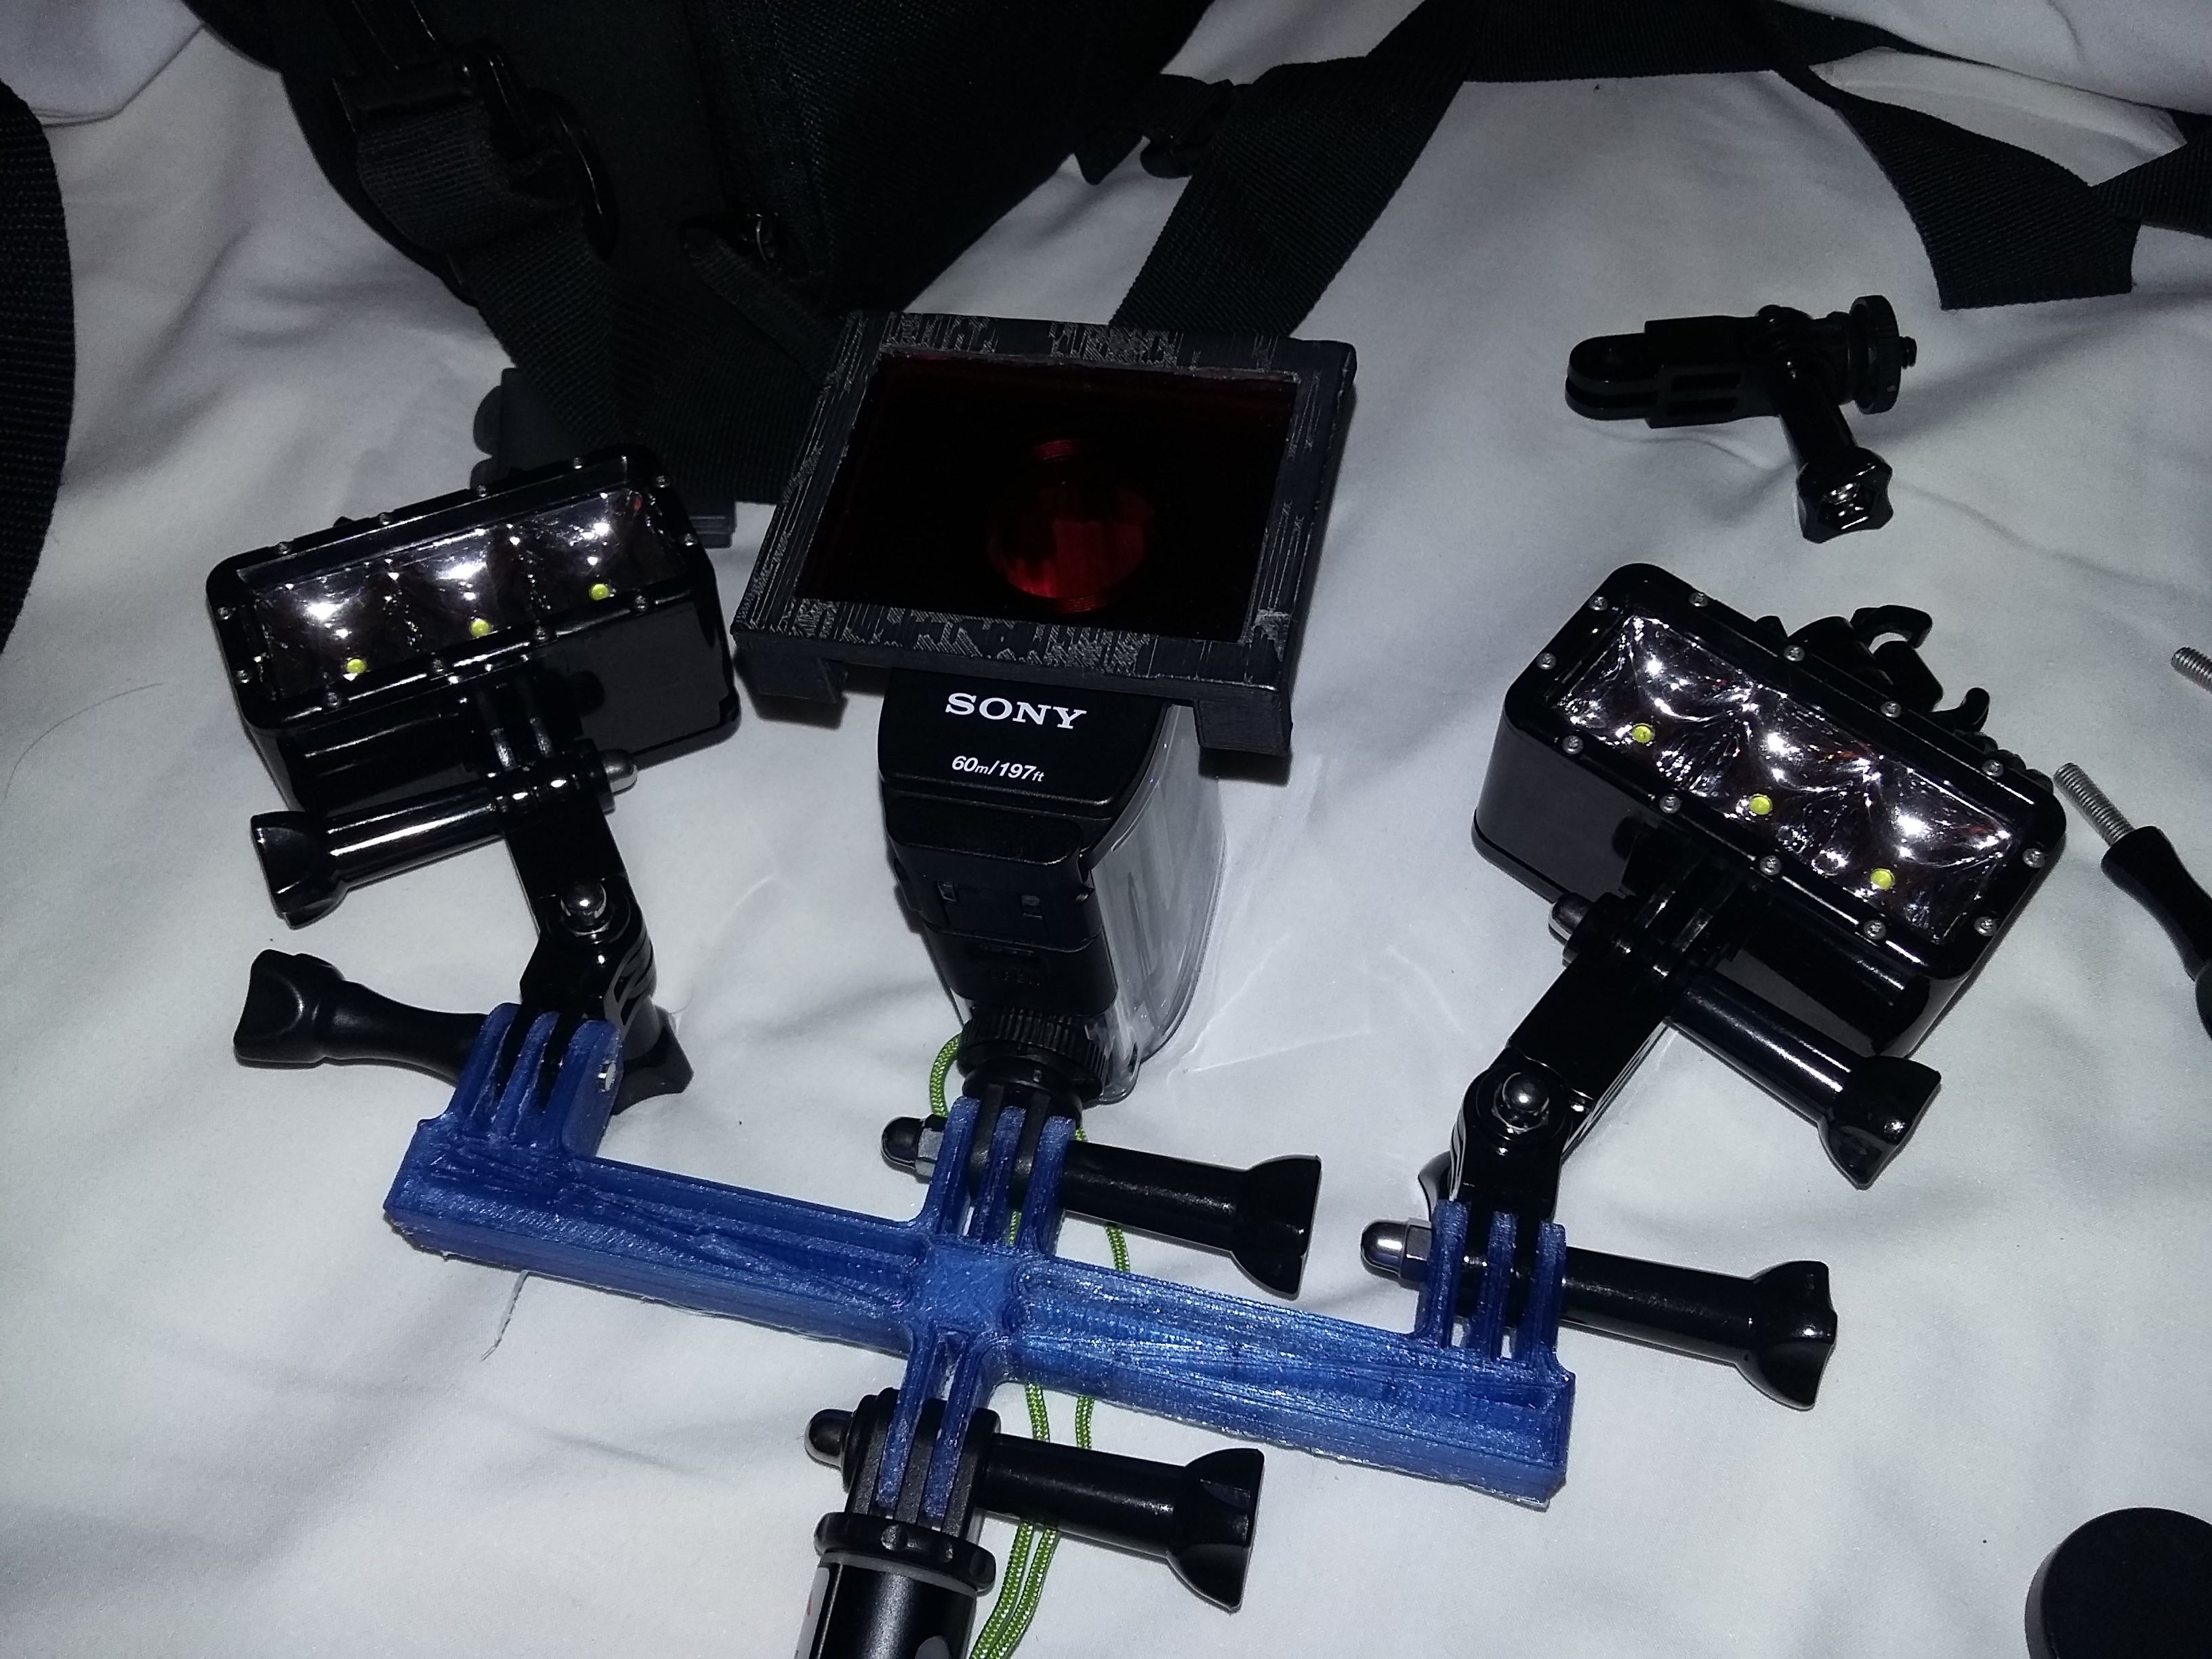 Holder for Sony / Gopro action camera and Lights